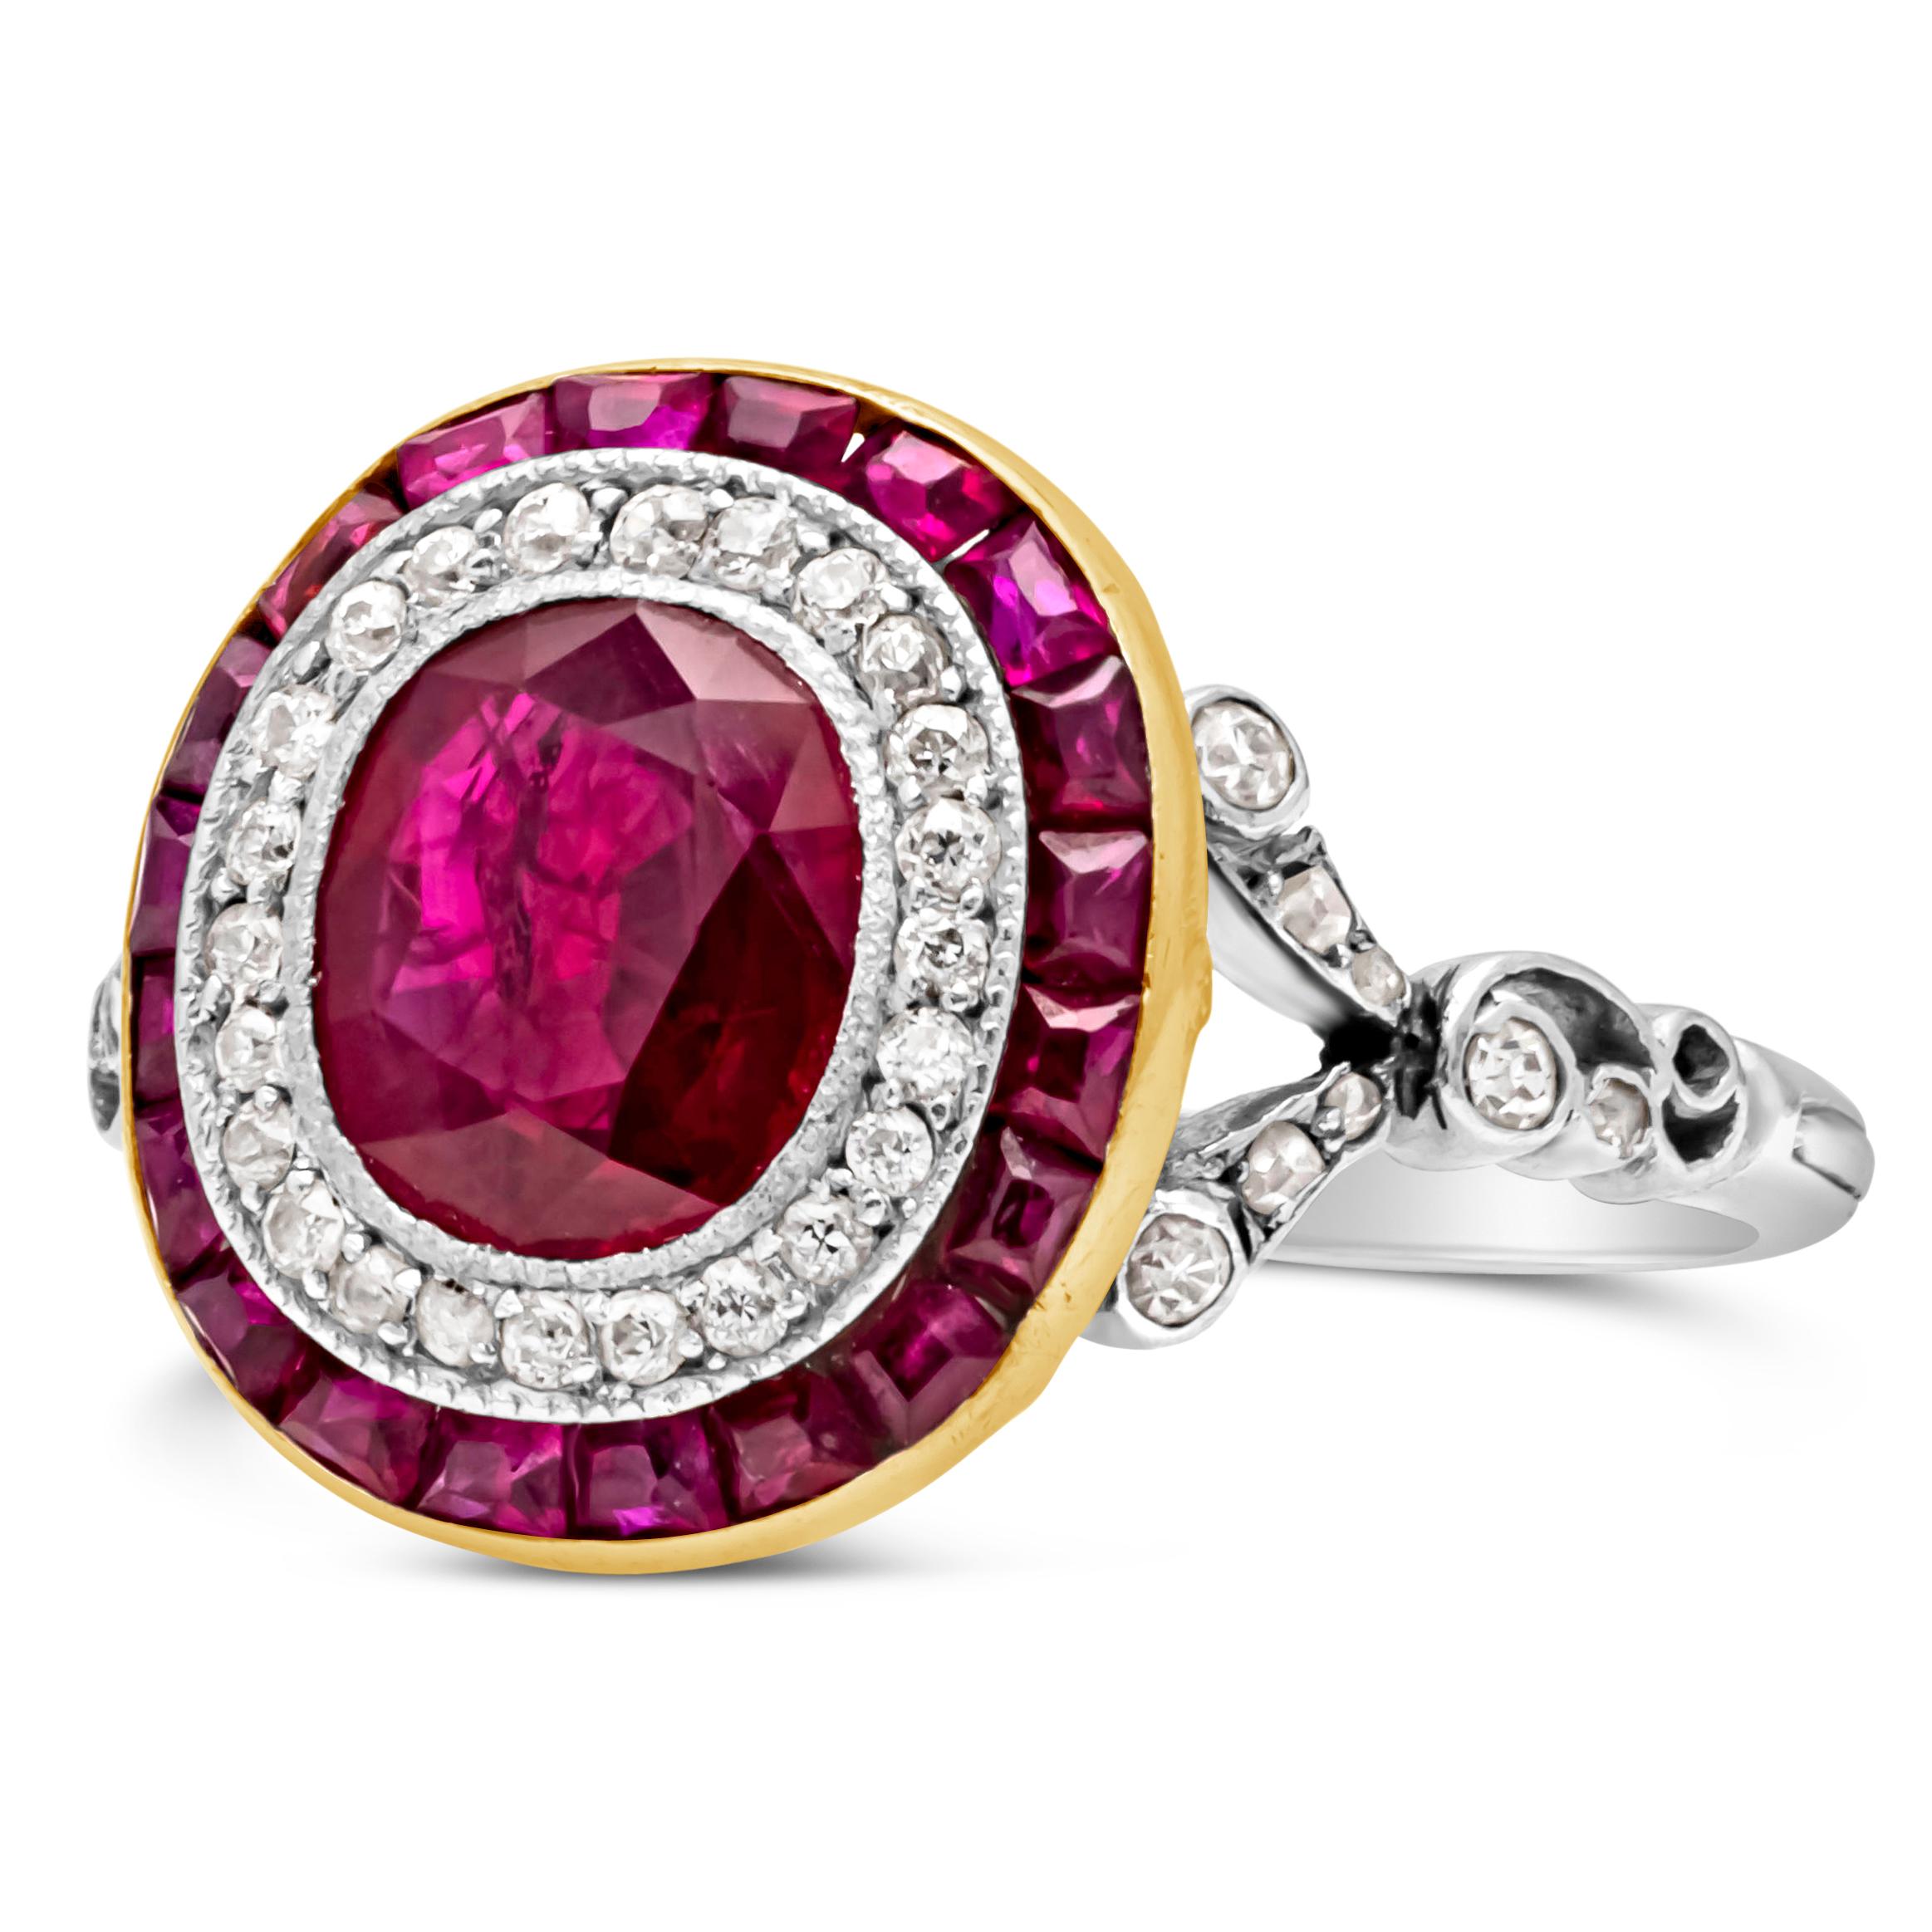 A beautiful antique art deco style engagement ring showcasing a AGL certified oval cut color-rich red ruby weighing 1.19 carats, surrounded by two rows of brilliant round diamonds weighing 0.30 carats total, set in a shared prong setting and